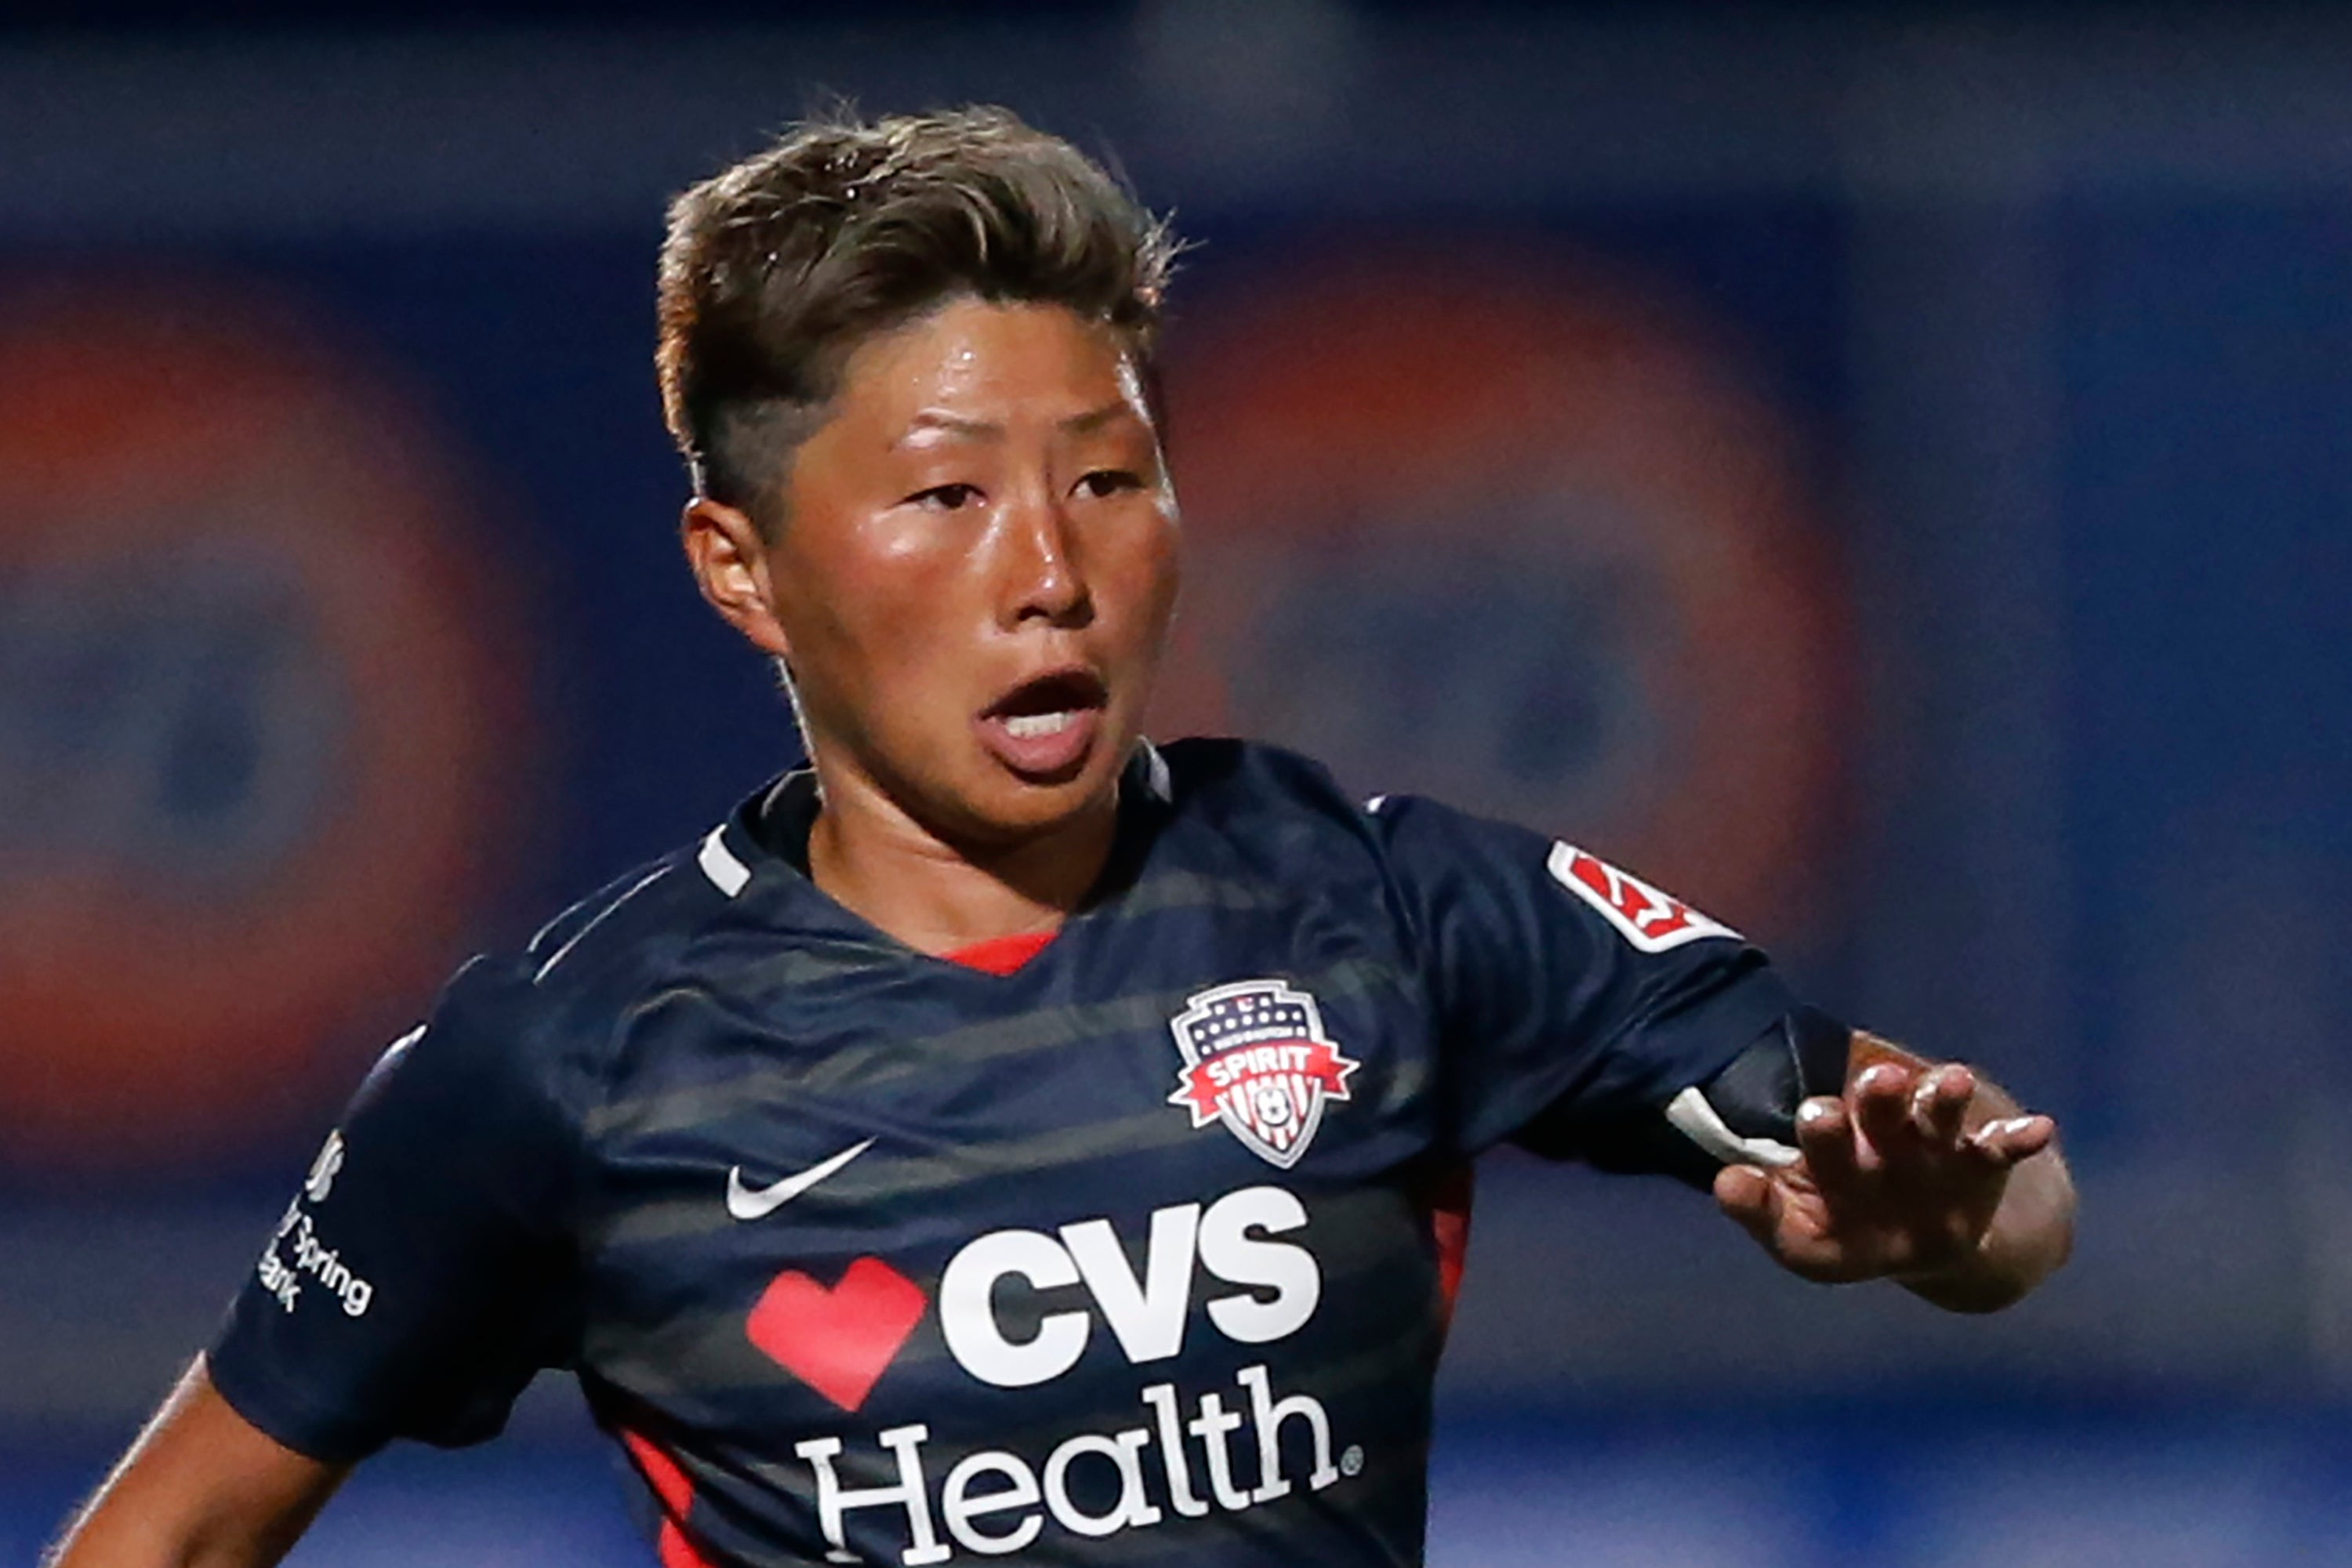 File image: In this 27 June, 2020, file photo, Washington Spirit forward Kumi Yokoyama dribbles the ball during the second half of an NWSL Challenge Cup soccer match against Chicago Red Stars at Zions Bank Stadium, in Herriman, Utah